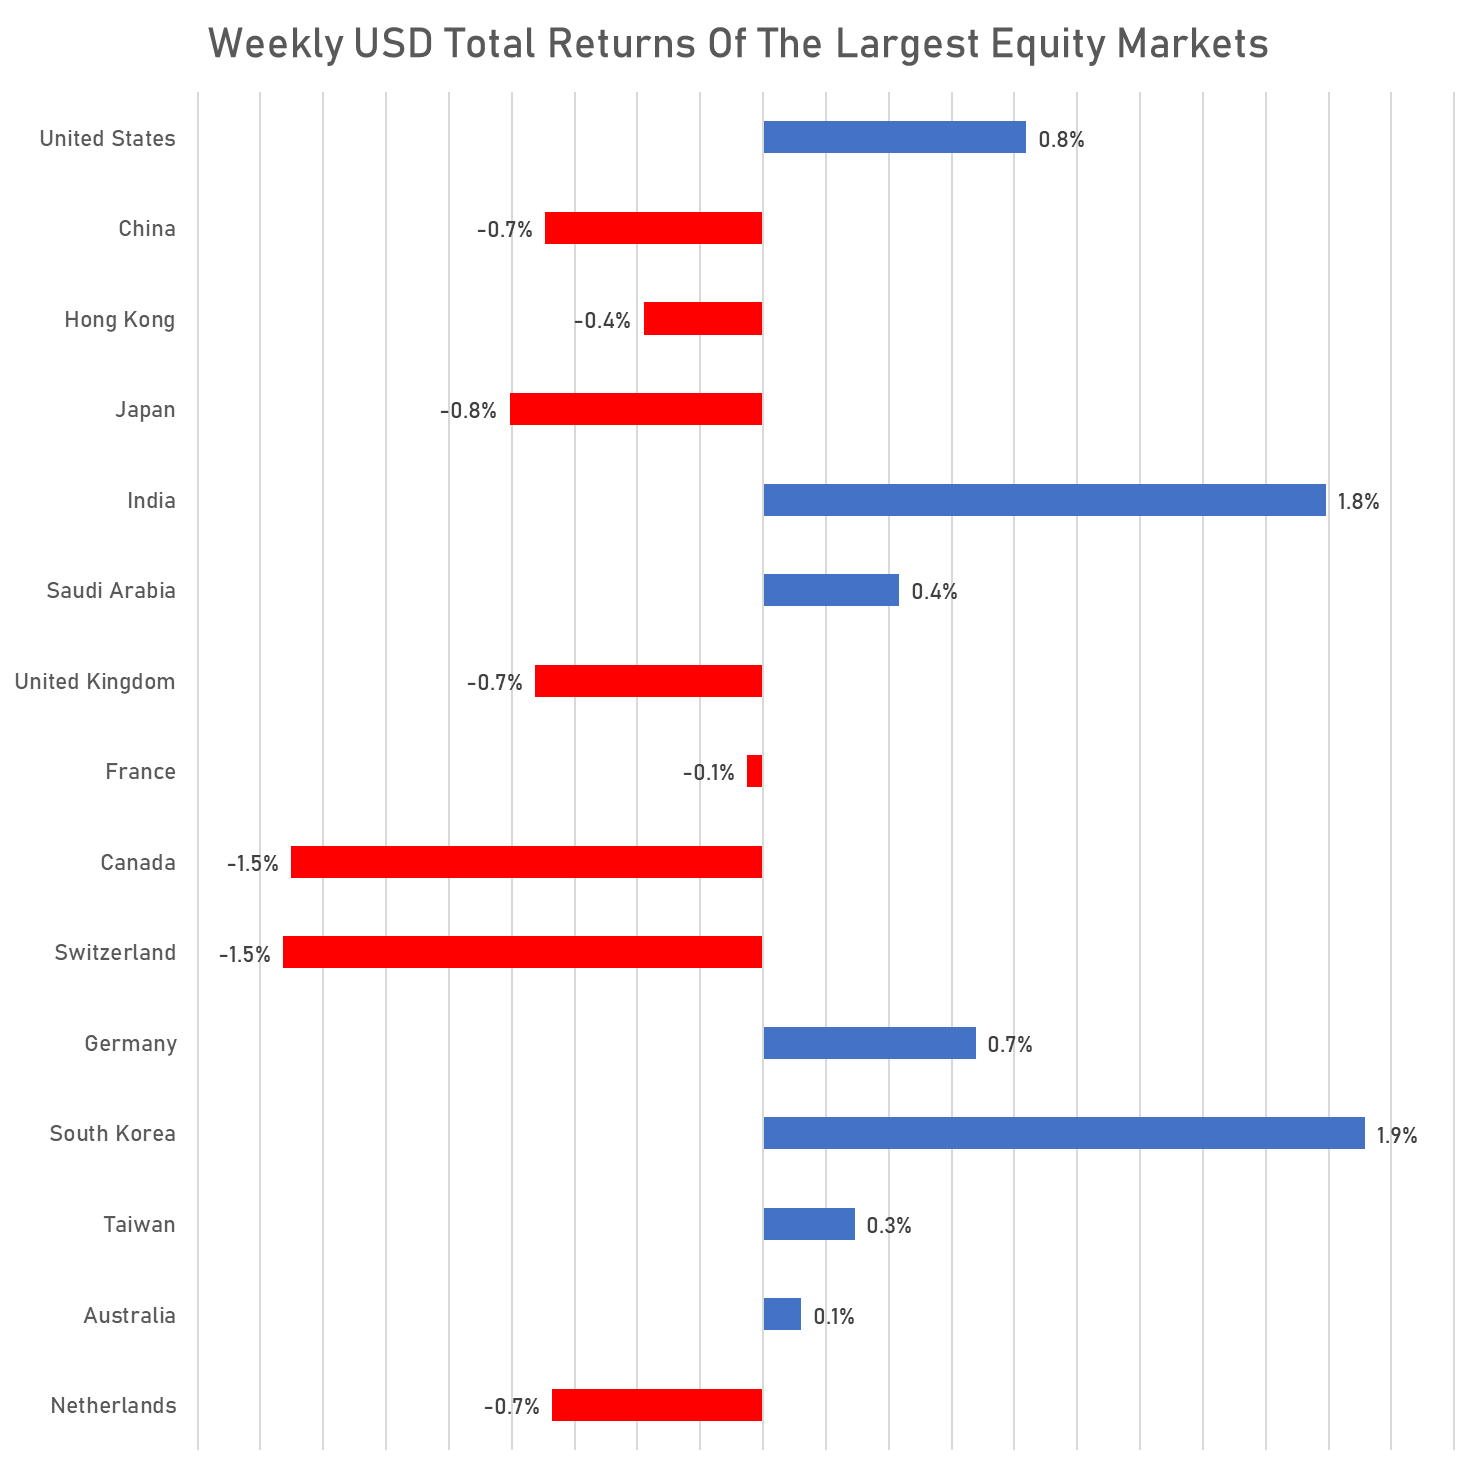 Weekly Total Returns Of The Largest Equity Markets | Sources: phipost.com, FactSet data